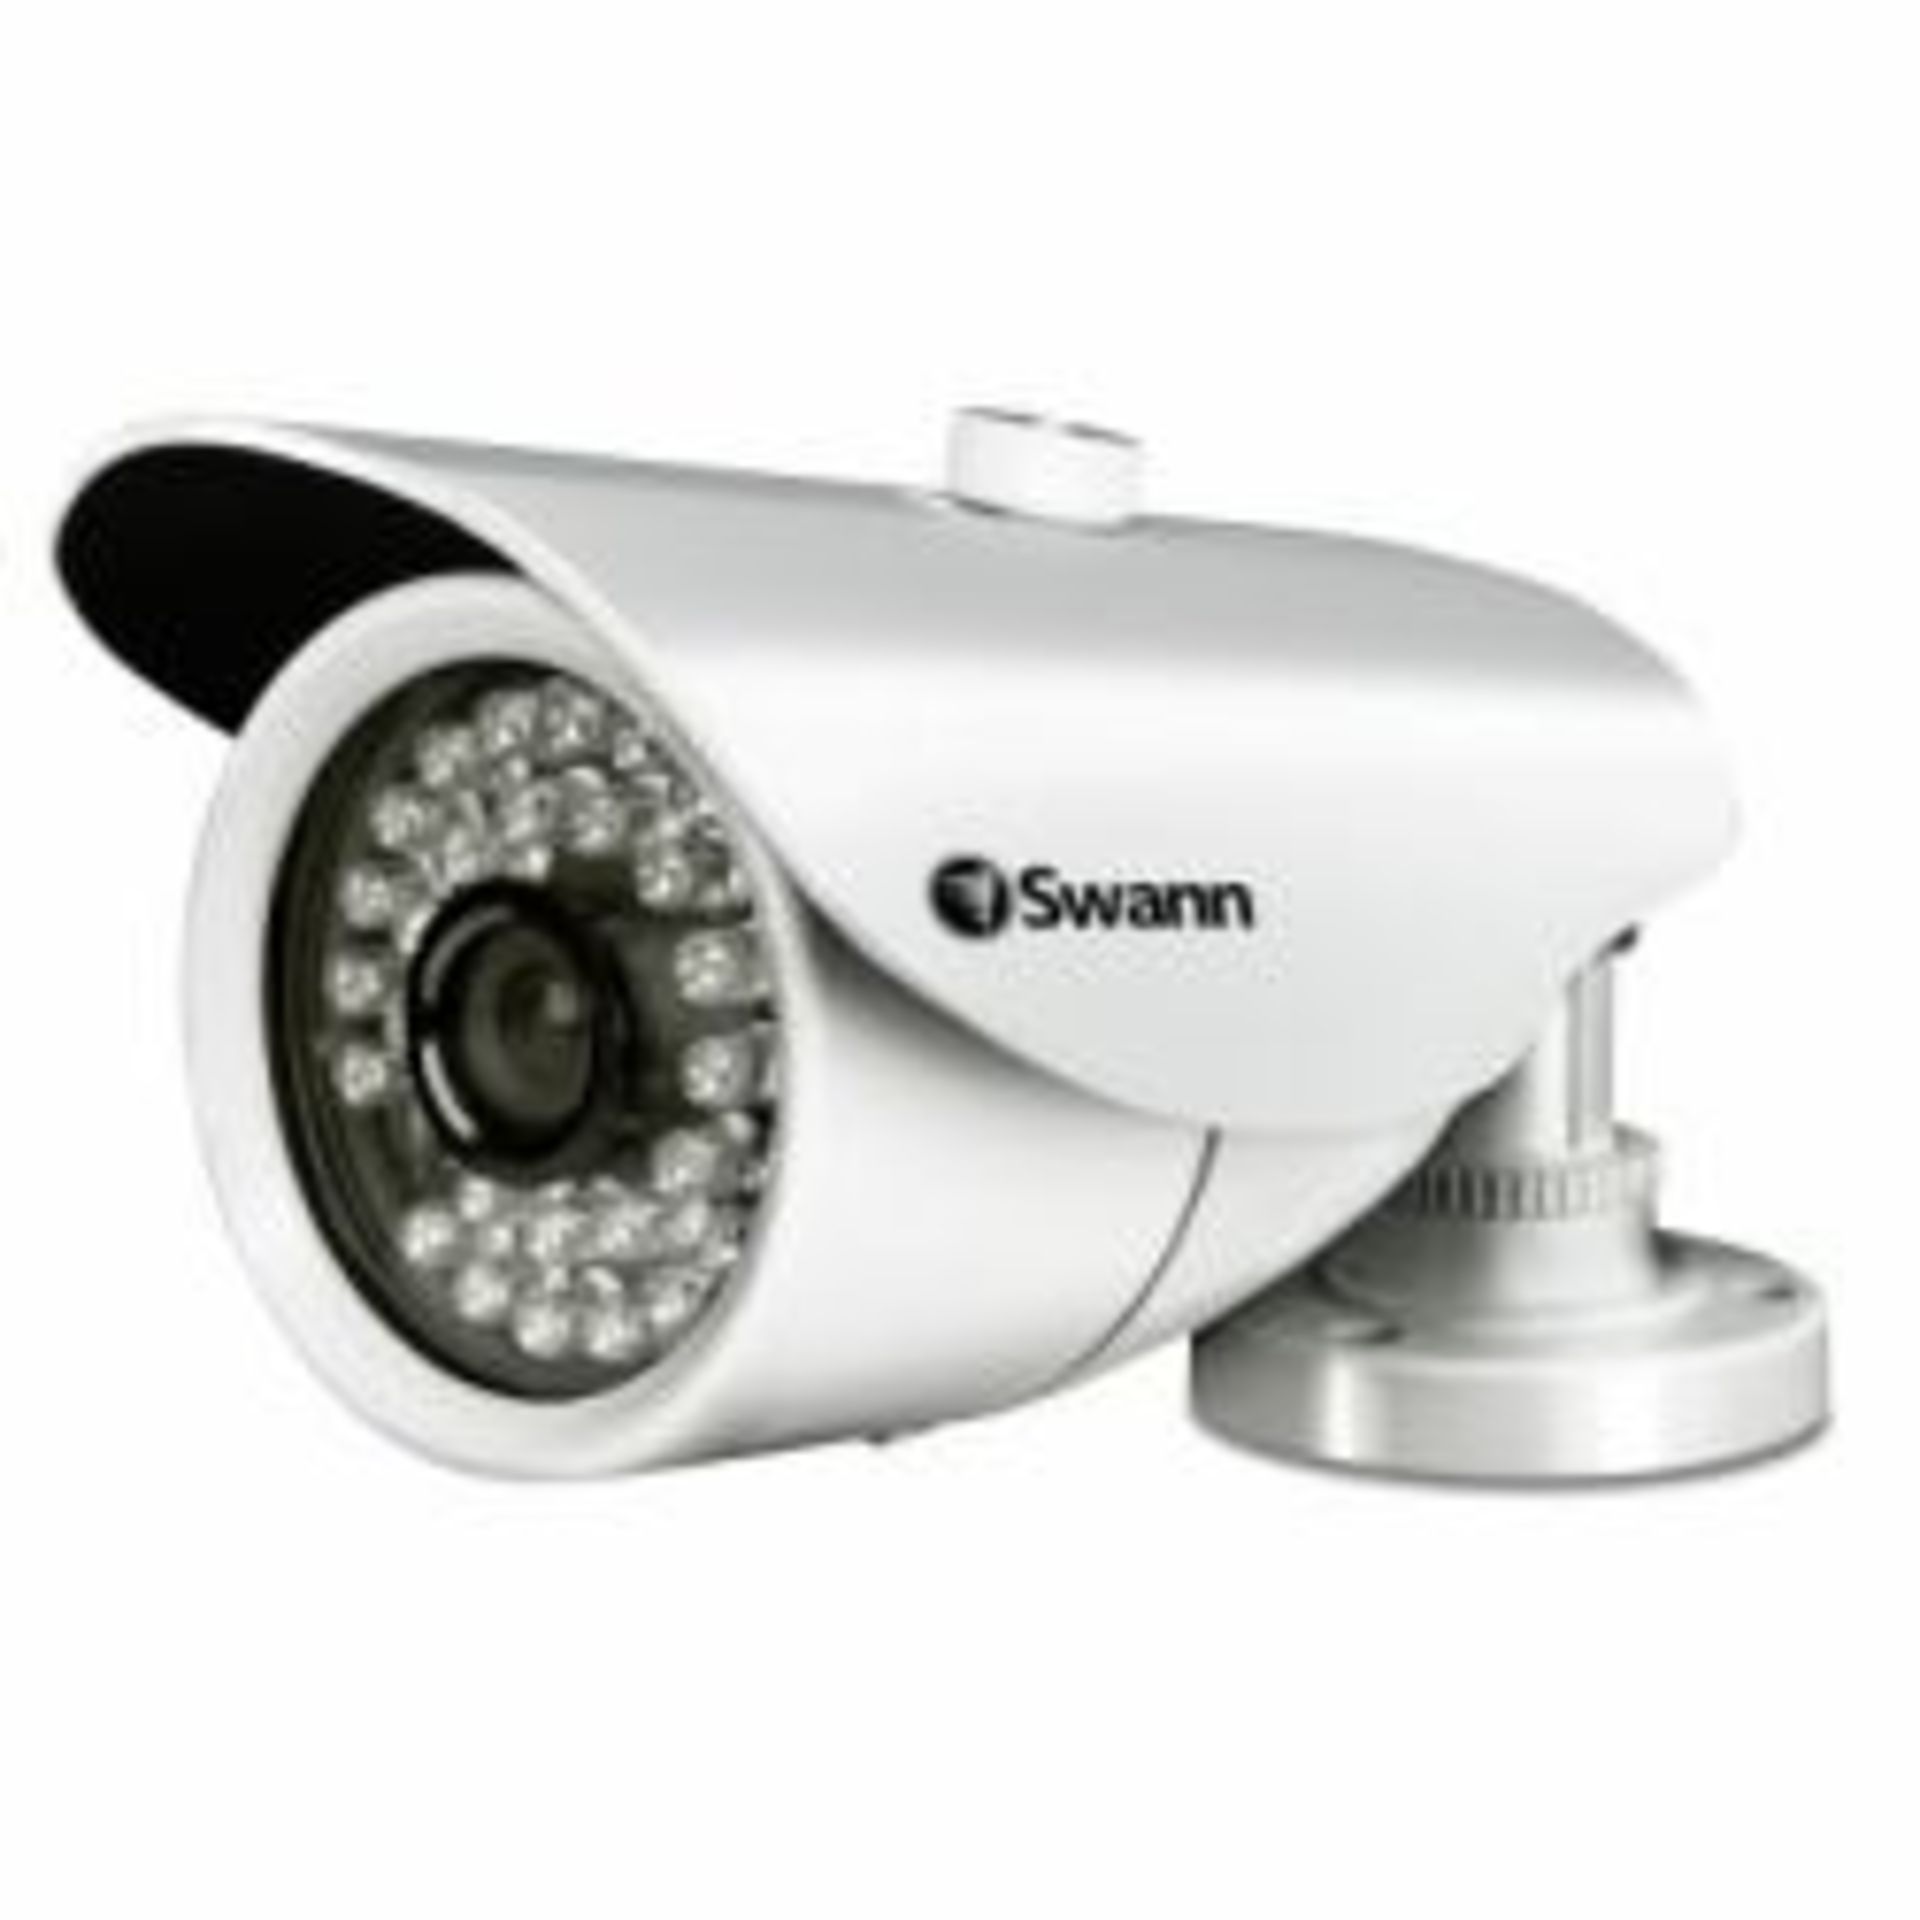 V Brand New Swann PRO-870 Bullet Cam 850 TVL - Powerful Night Vision Up To 35m/114ft X 2 YOUR BID